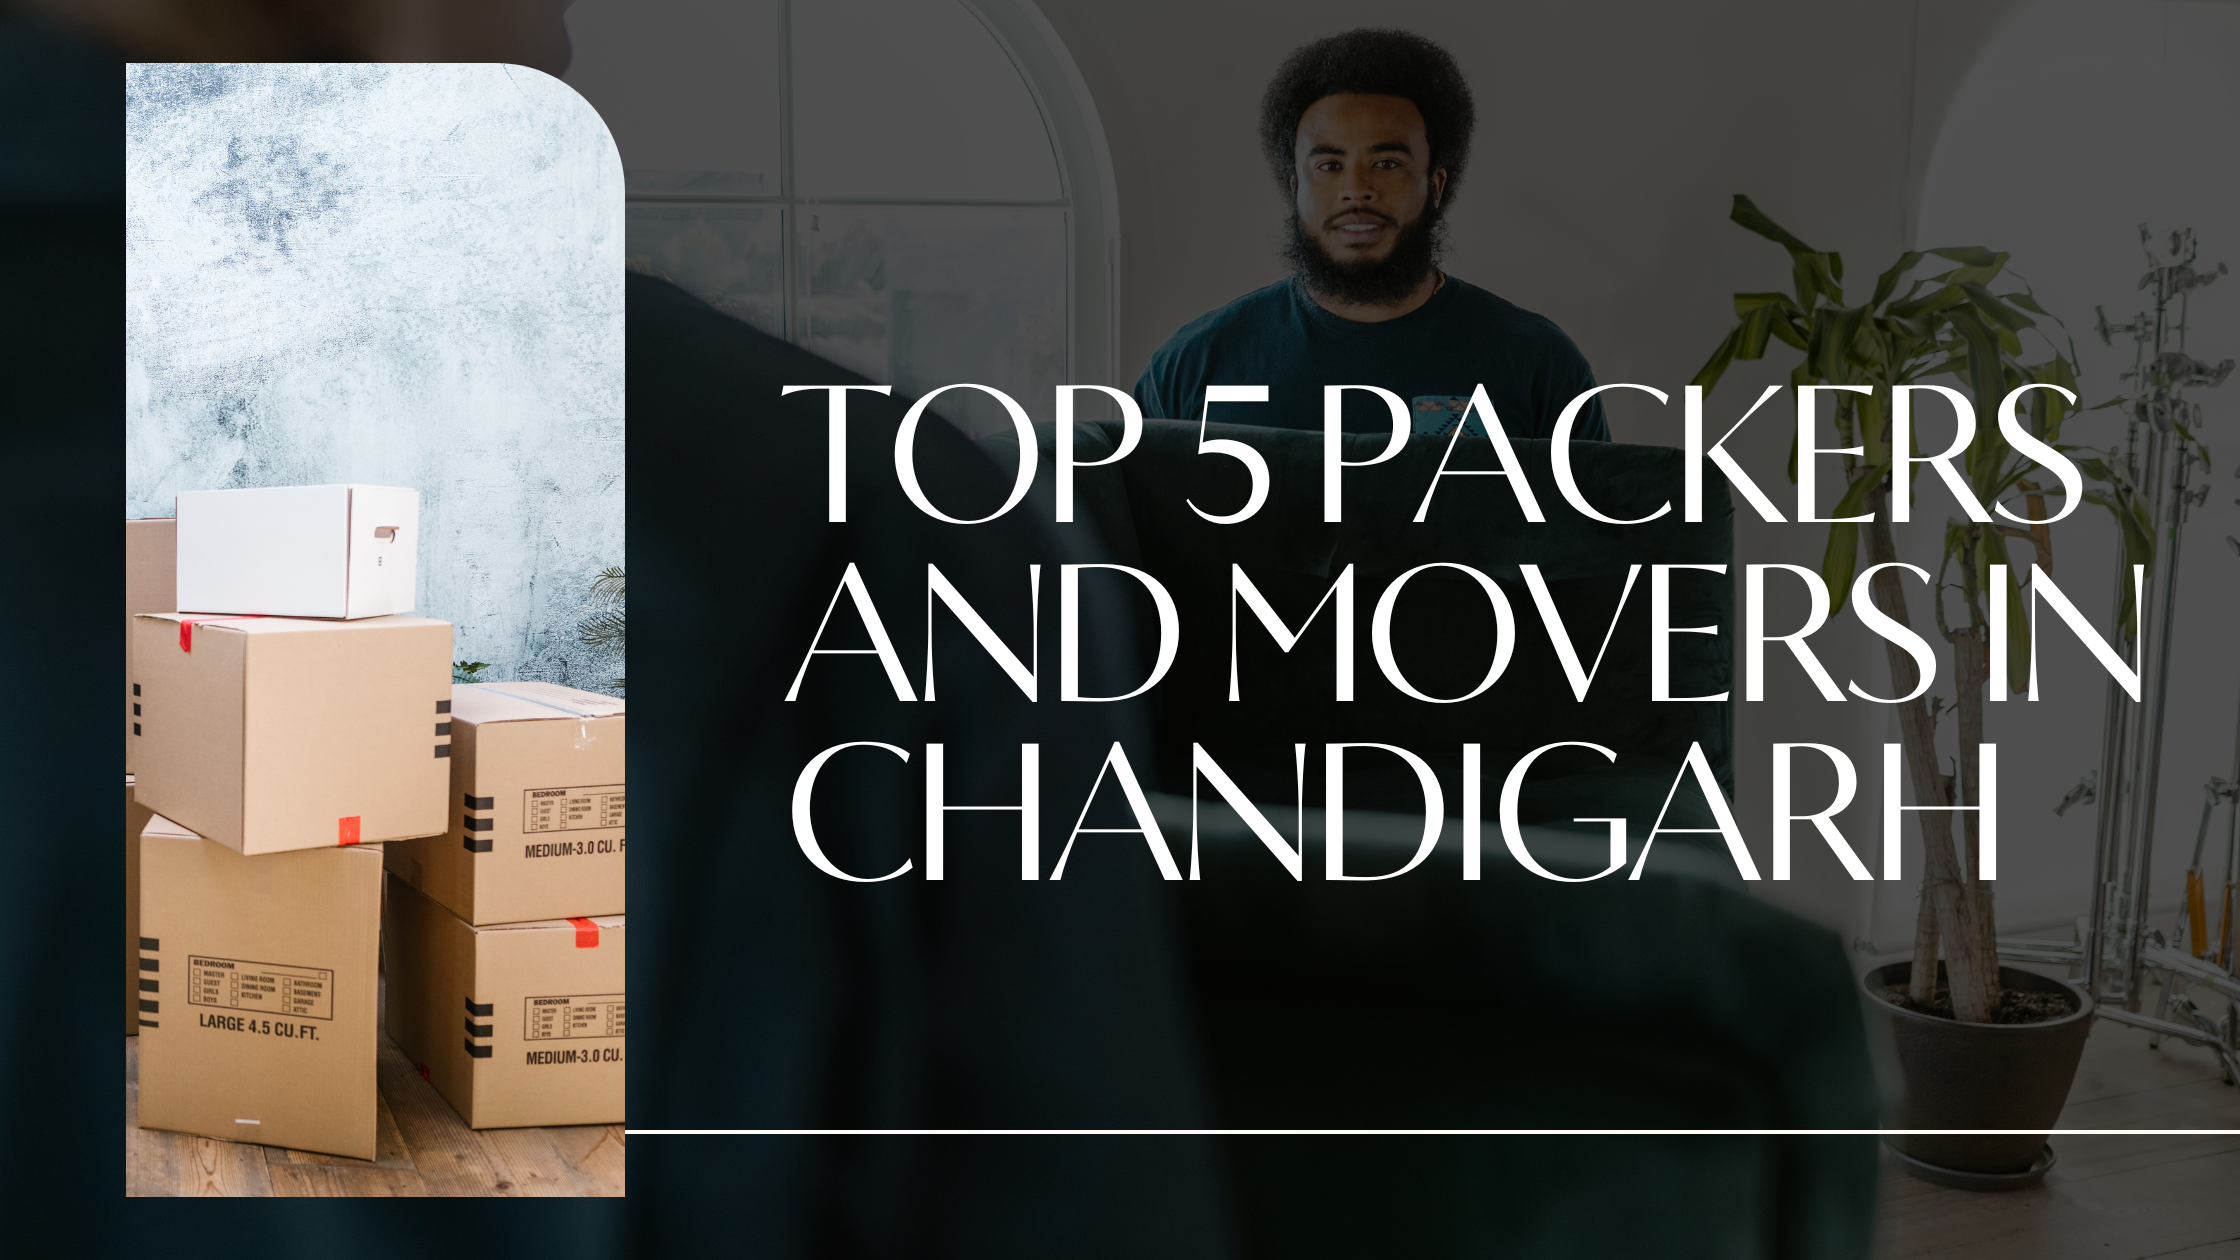 Top 5 Packers and Movers in Chandigarh